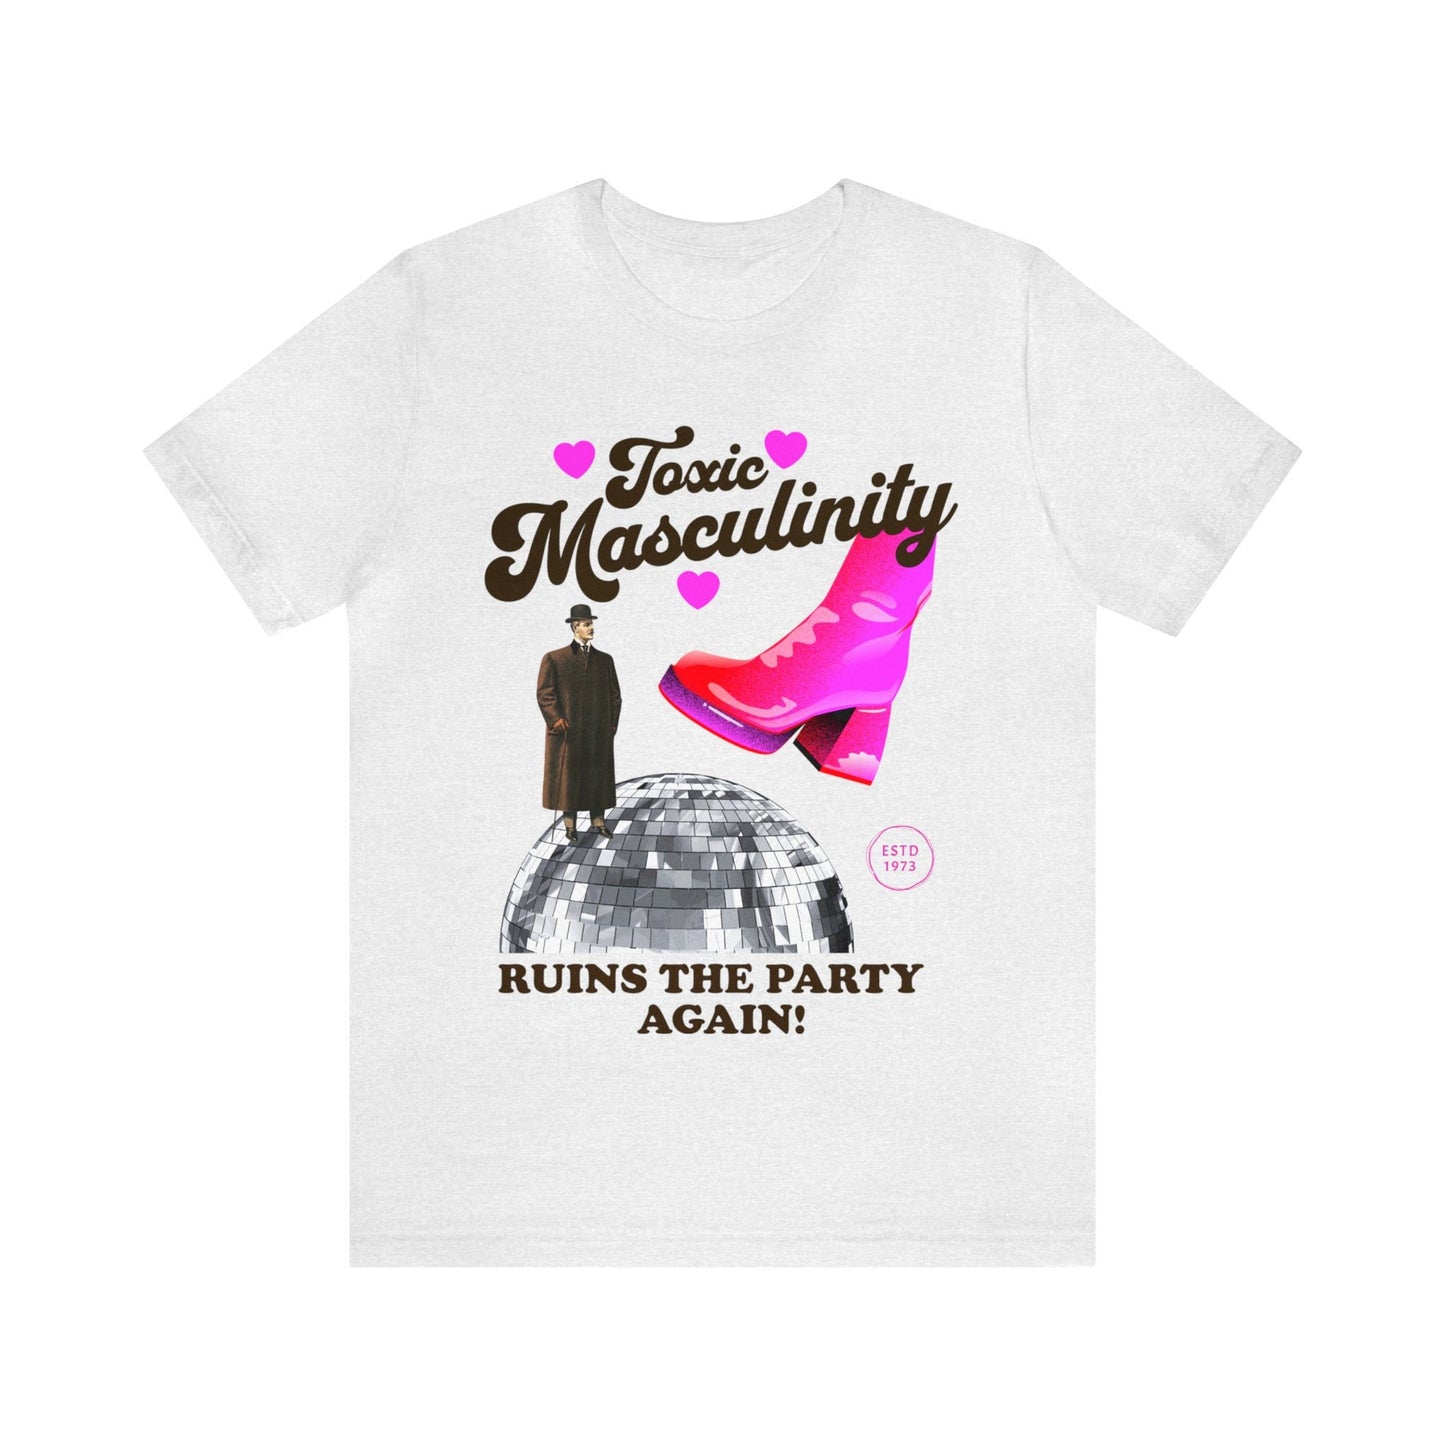 Toxic masculinity ruins the party again shirt